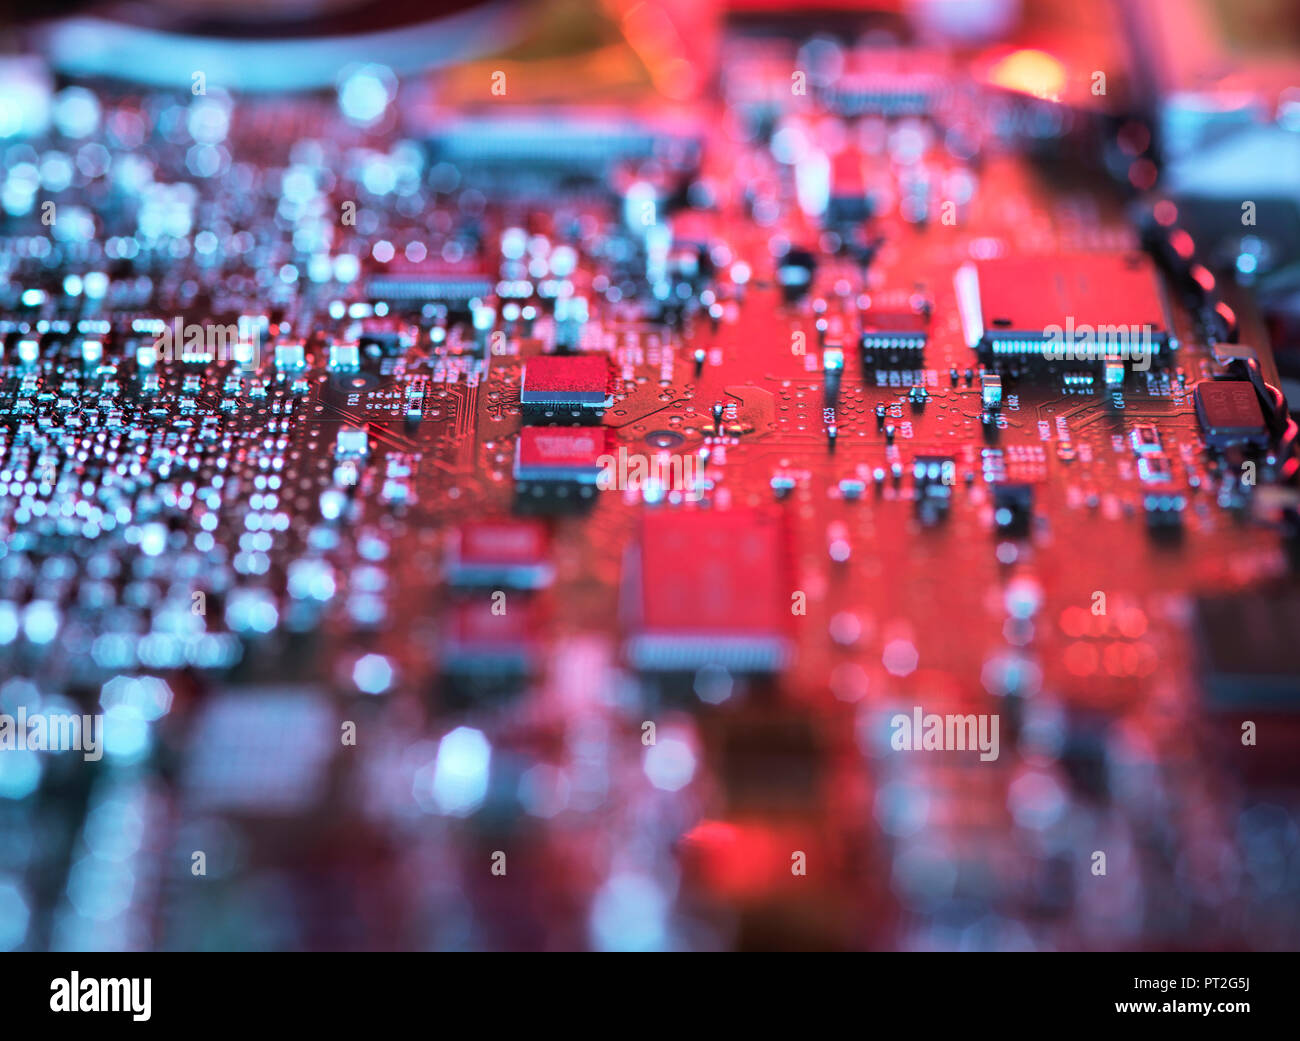 Inside a laptop computer, mother board and electronic components Stock Photo